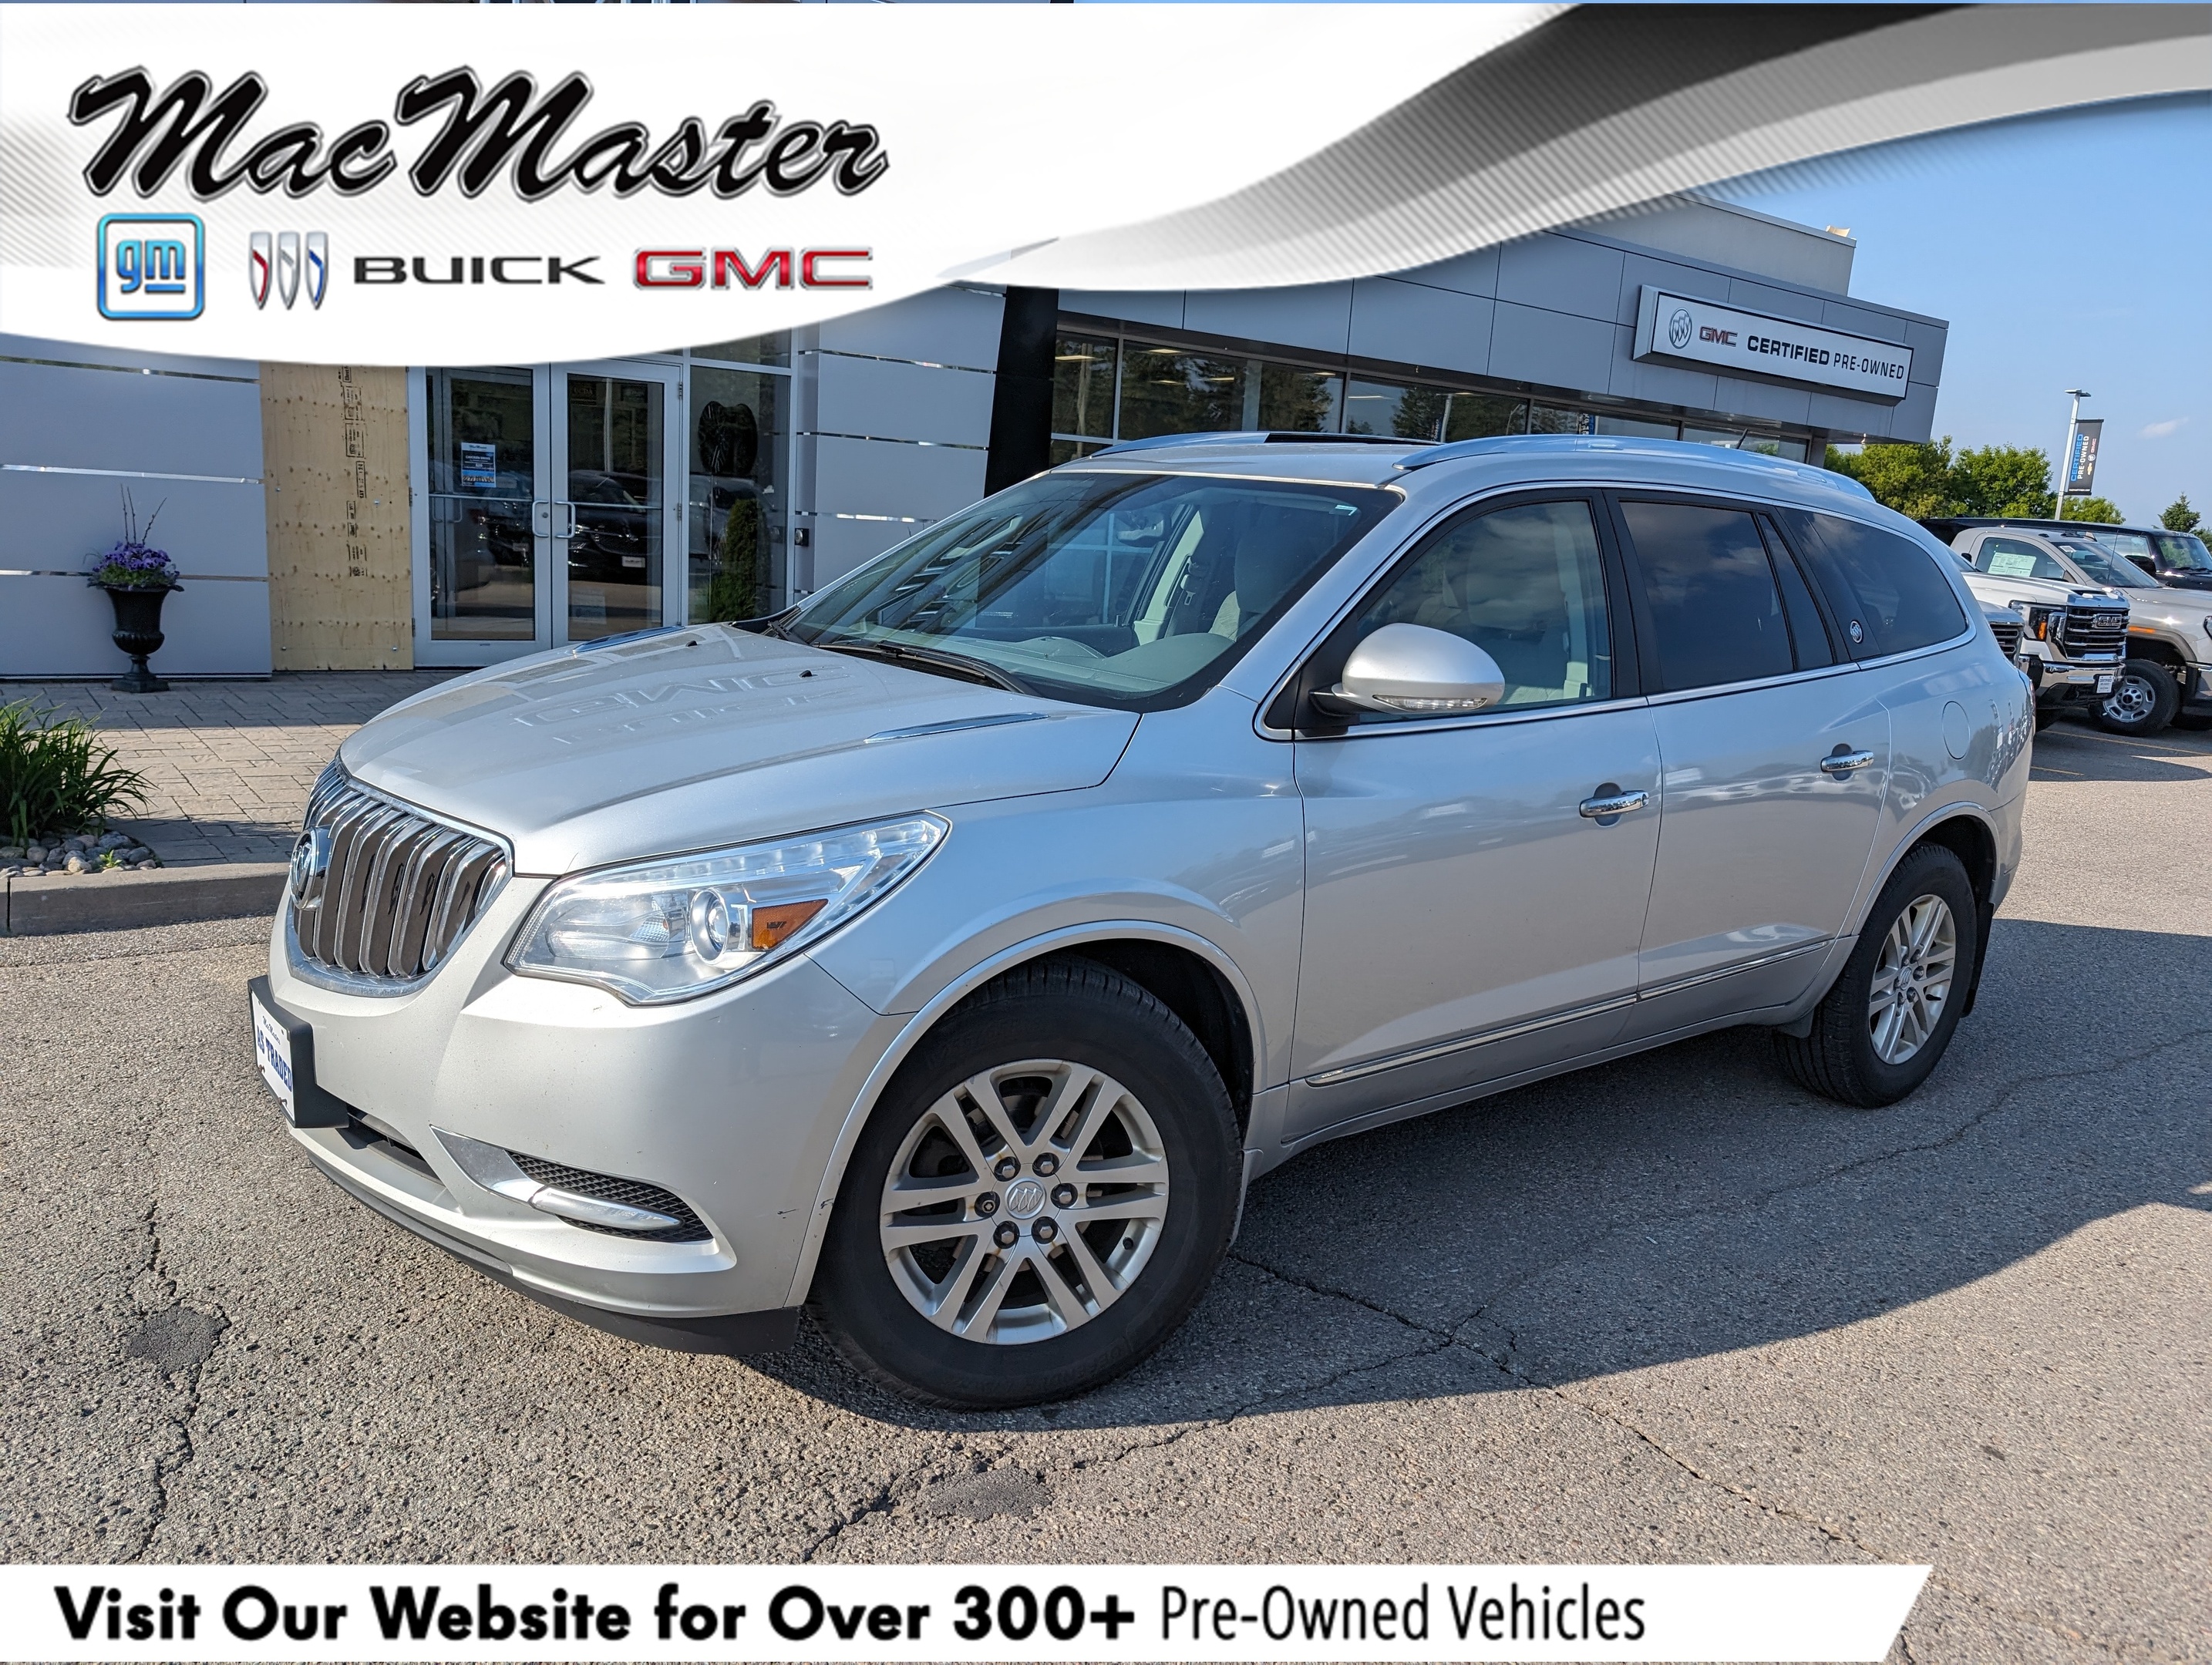 2014 Buick Enclave CONVENIENCE AWD, 7-PASS, REMOTE START, AS-TRADED!